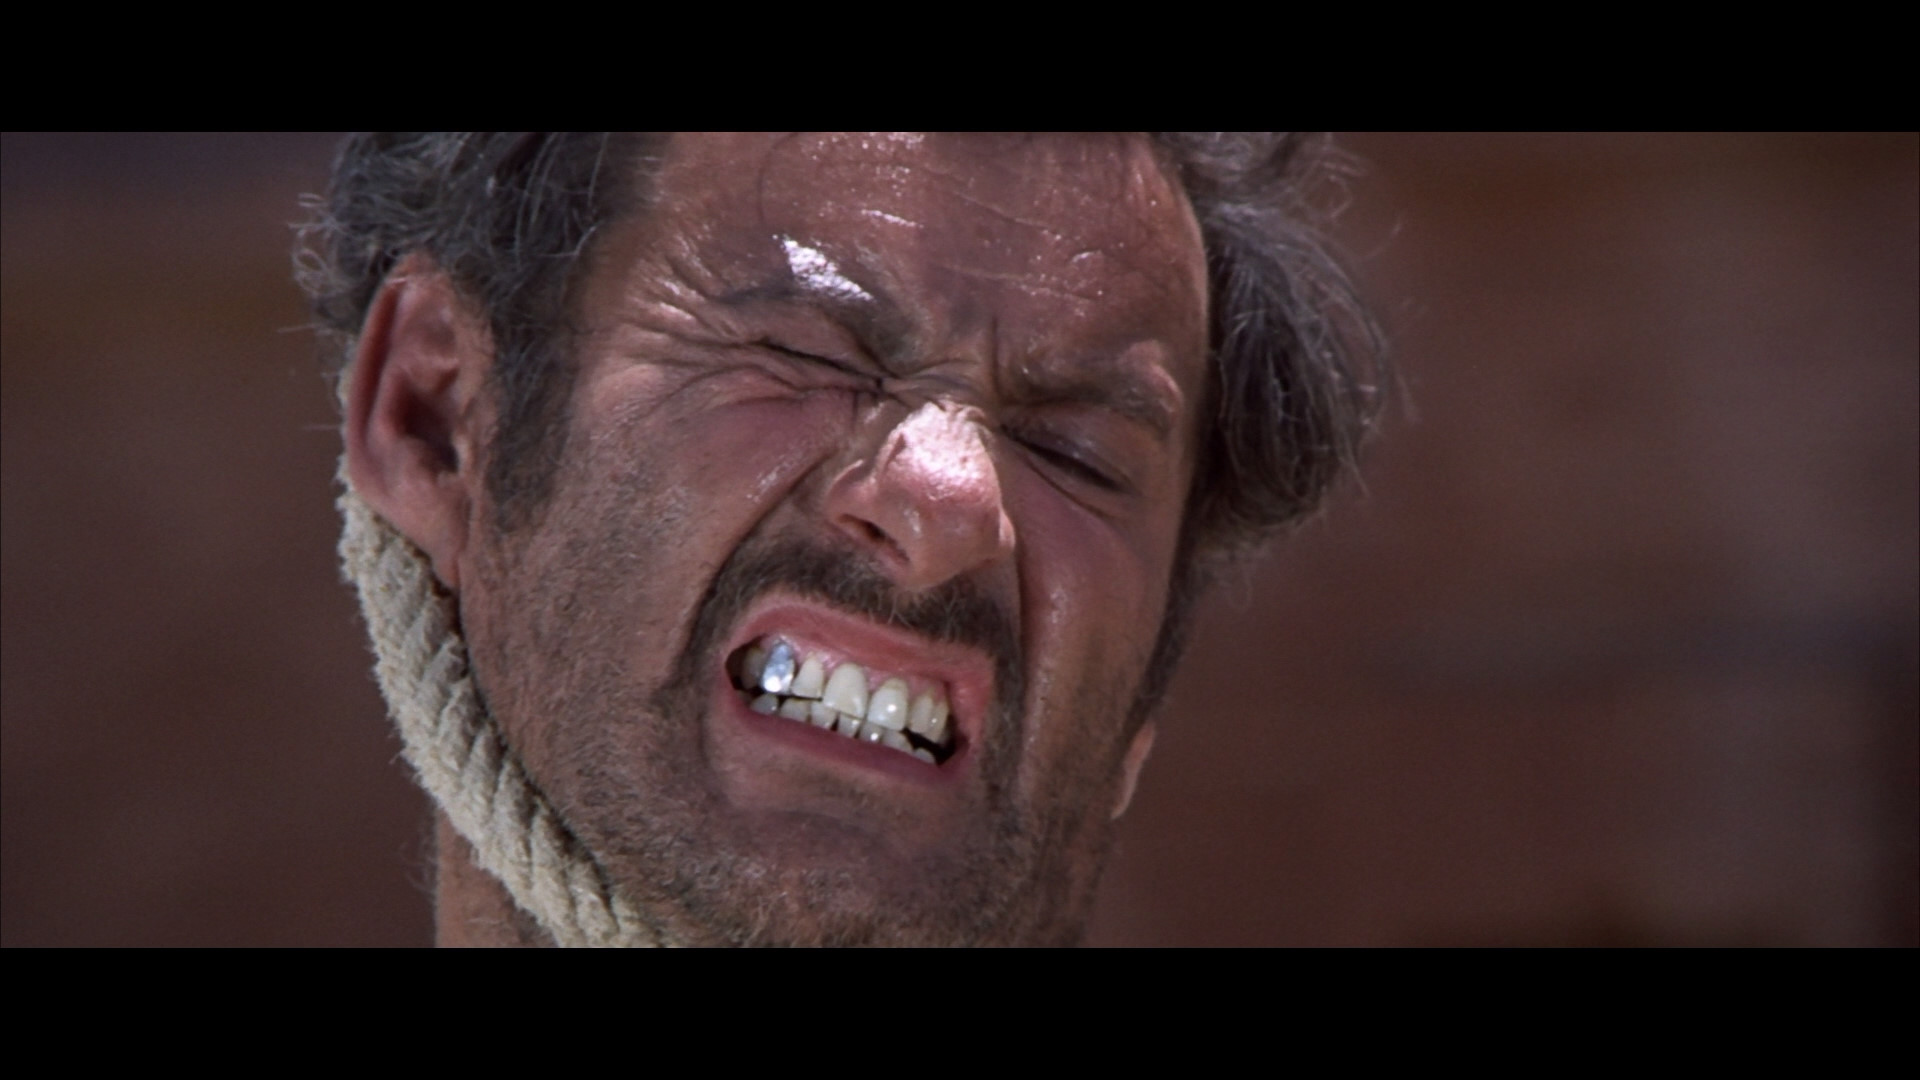 THE GOOD THE BAD AND THE UGLY western r wallpaper | 1920x1080 ...